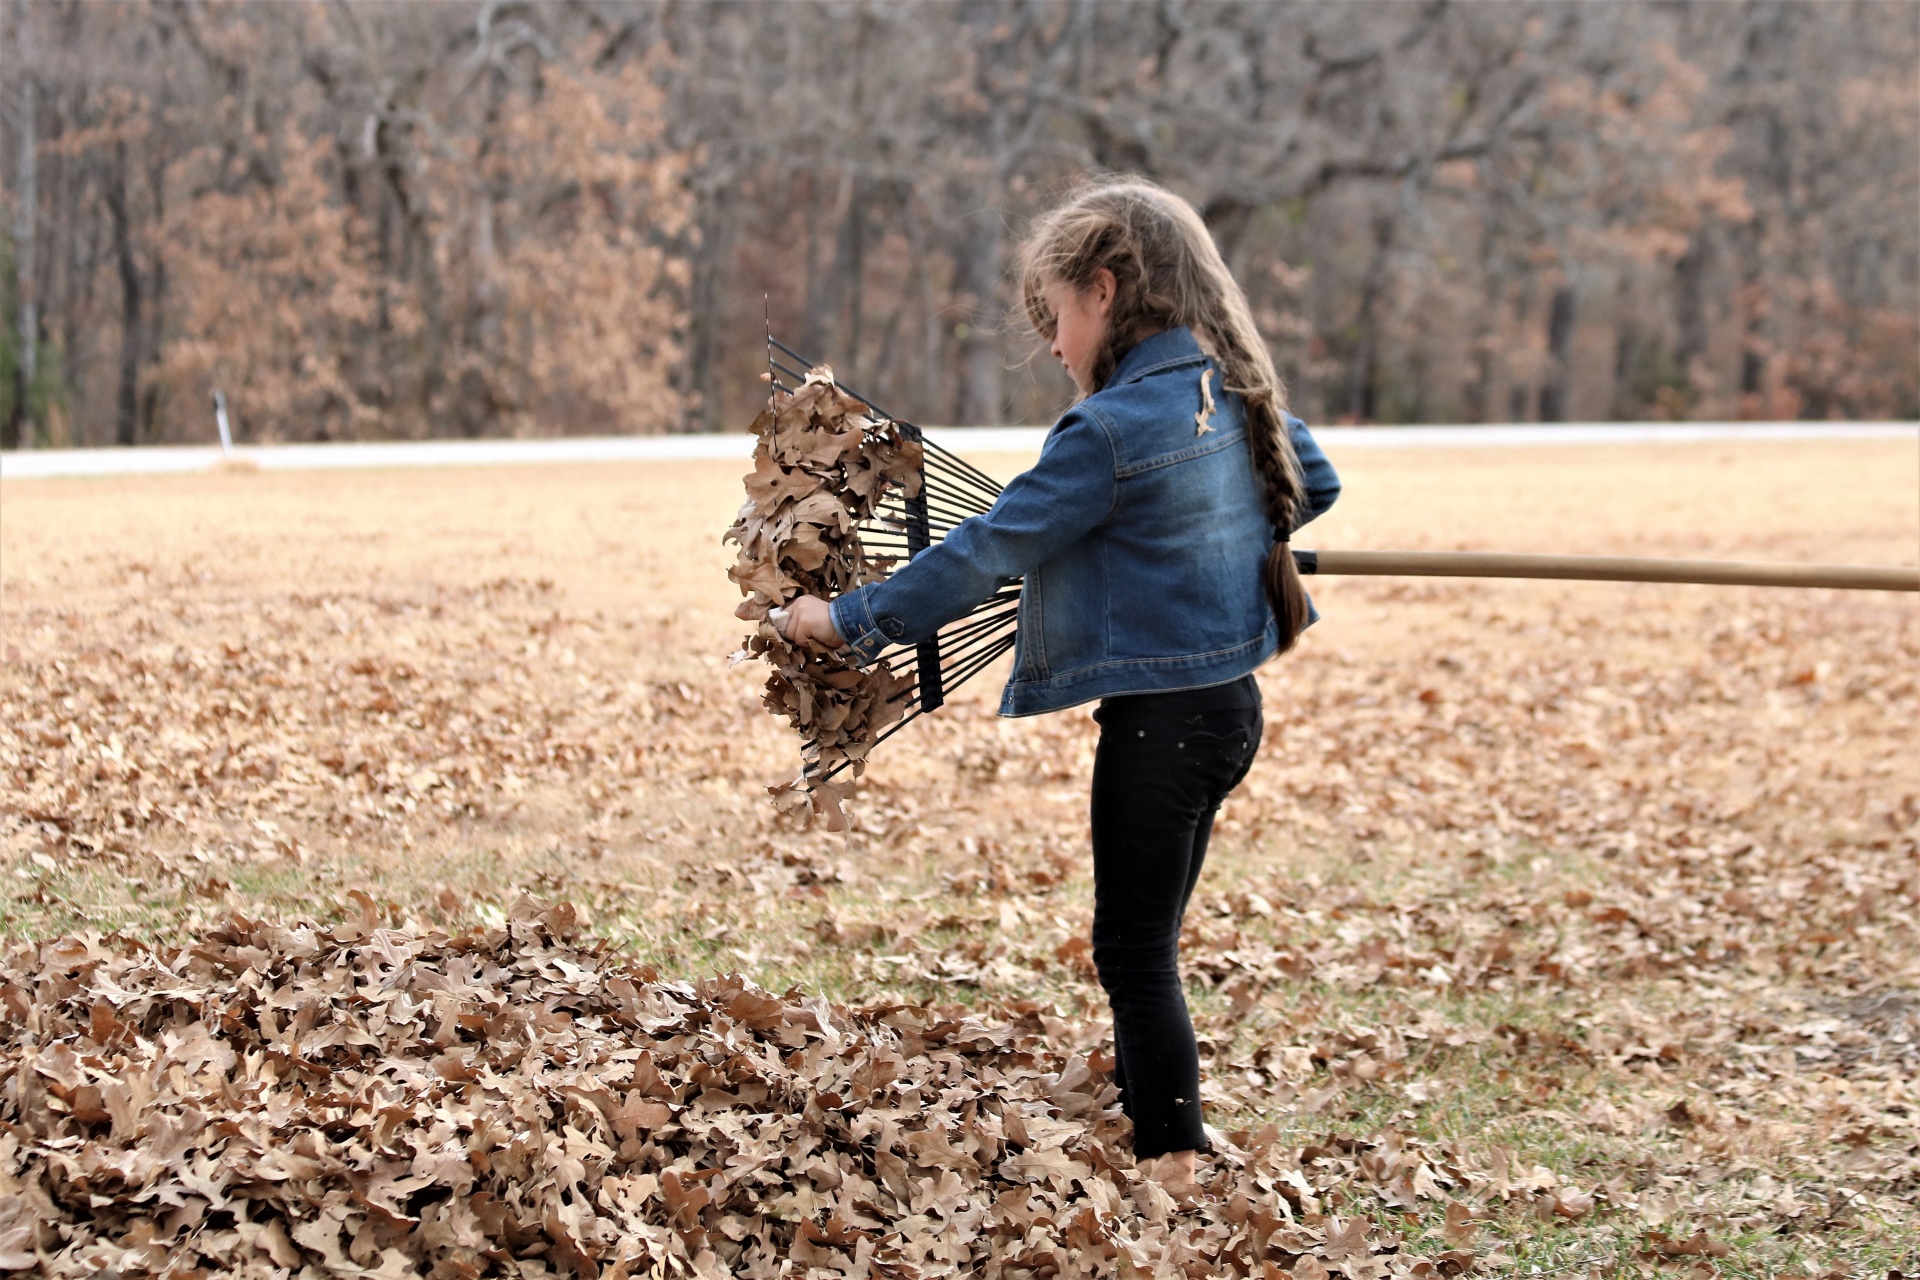 A cute little girl with long braided hair, cleaning leaves out of a rake in fall.